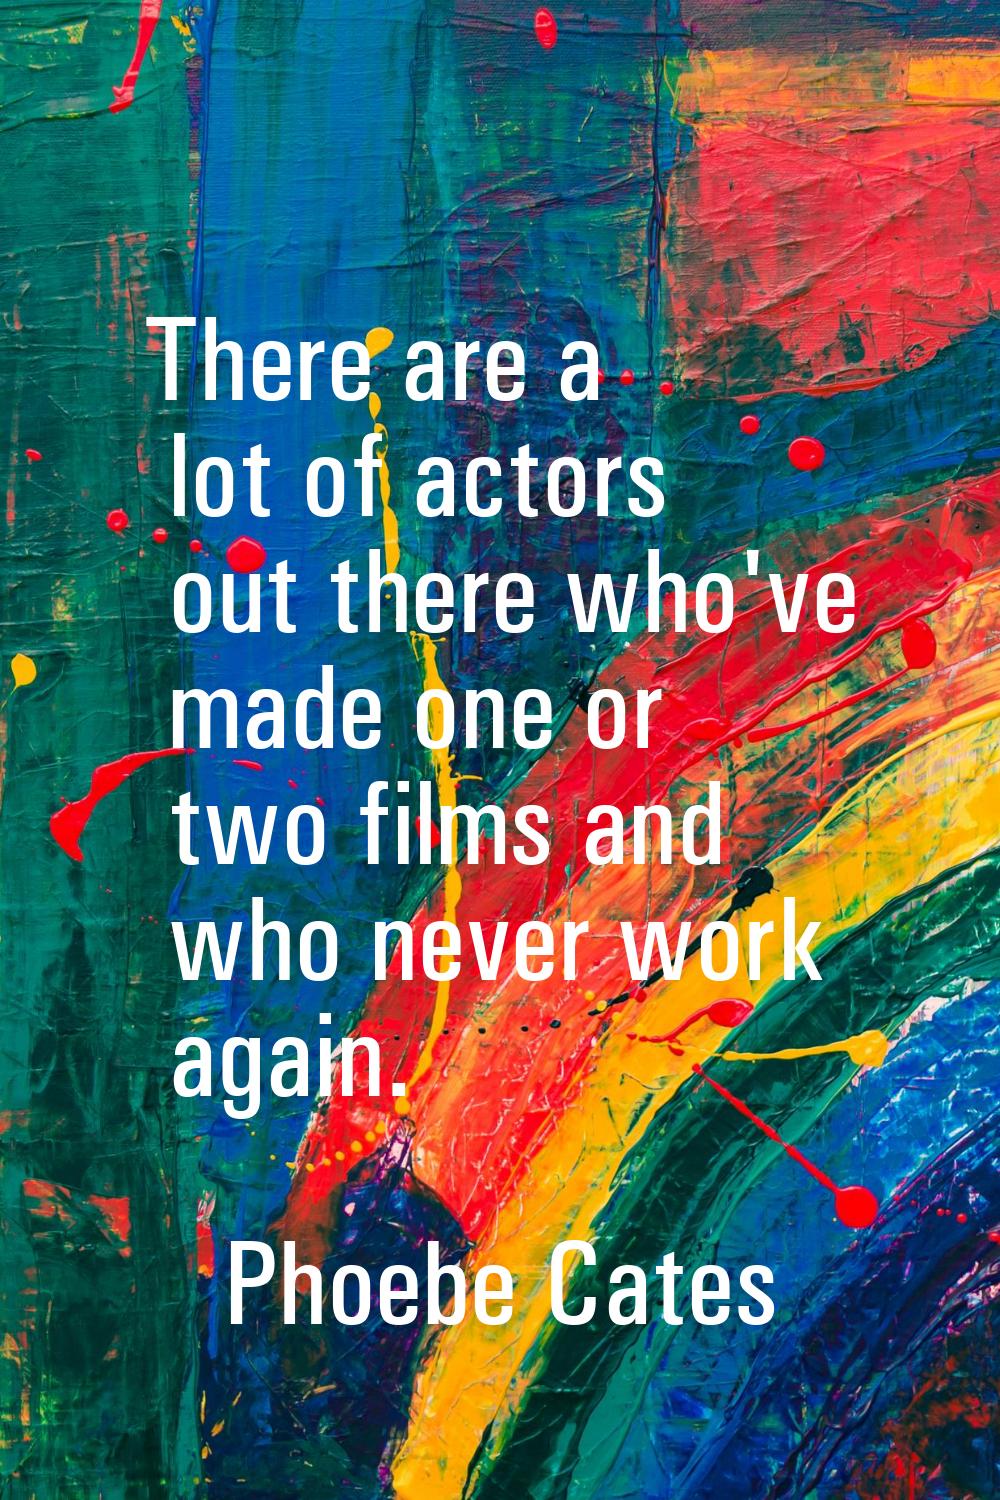 There are a lot of actors out there who've made one or two films and who never work again.